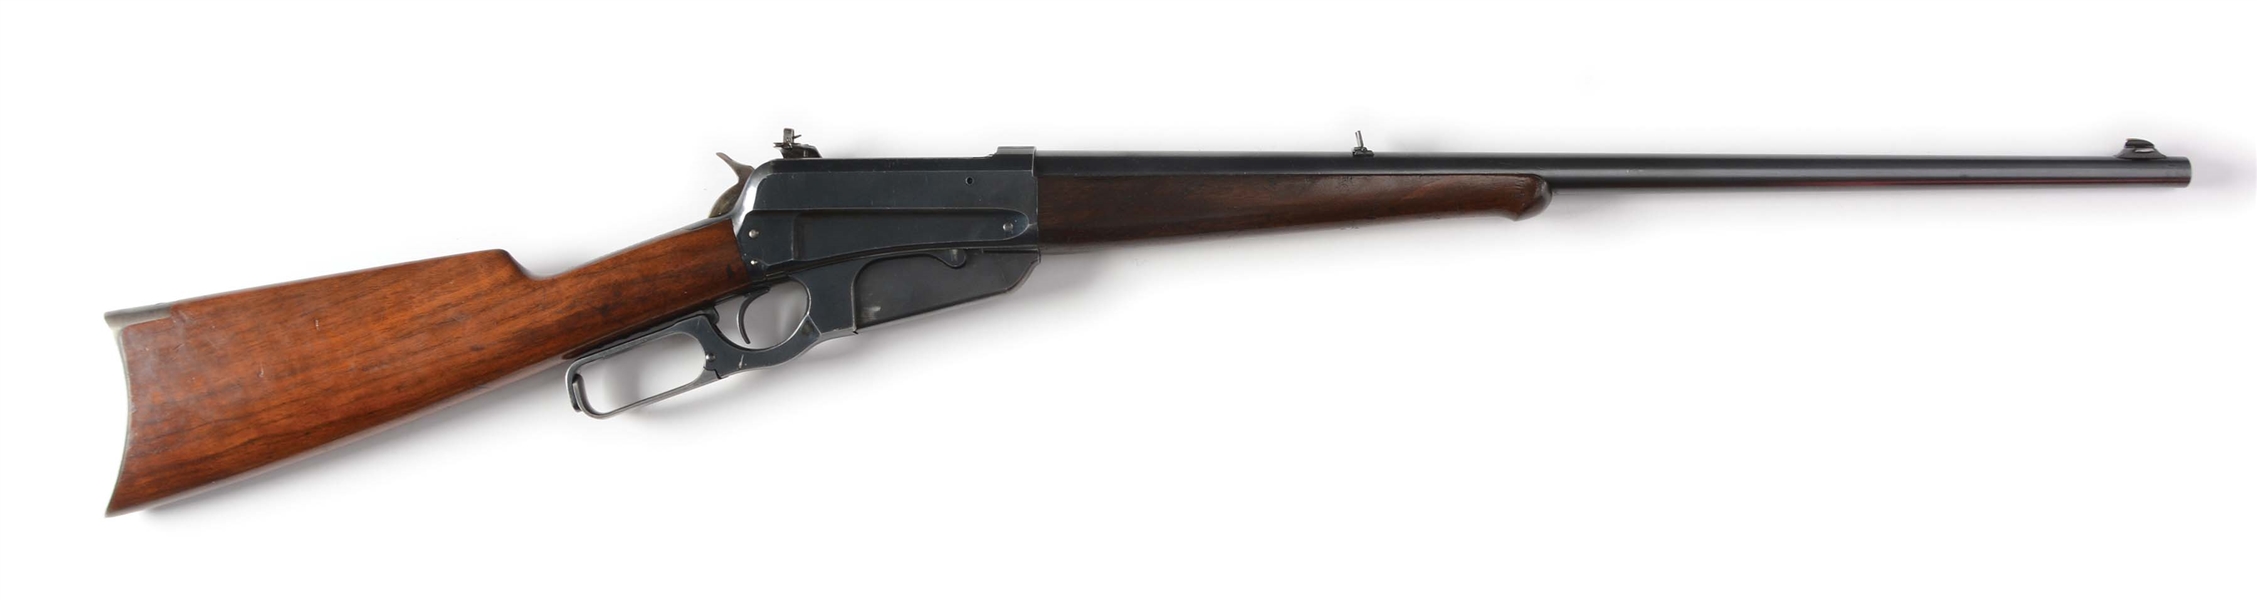 (C) SCARCE HIGH CONDITION SPRINGFIELD .30-03 CALIBER WINCHESTER MODEL 1895 LEVER ACTION RIFLE (1911).